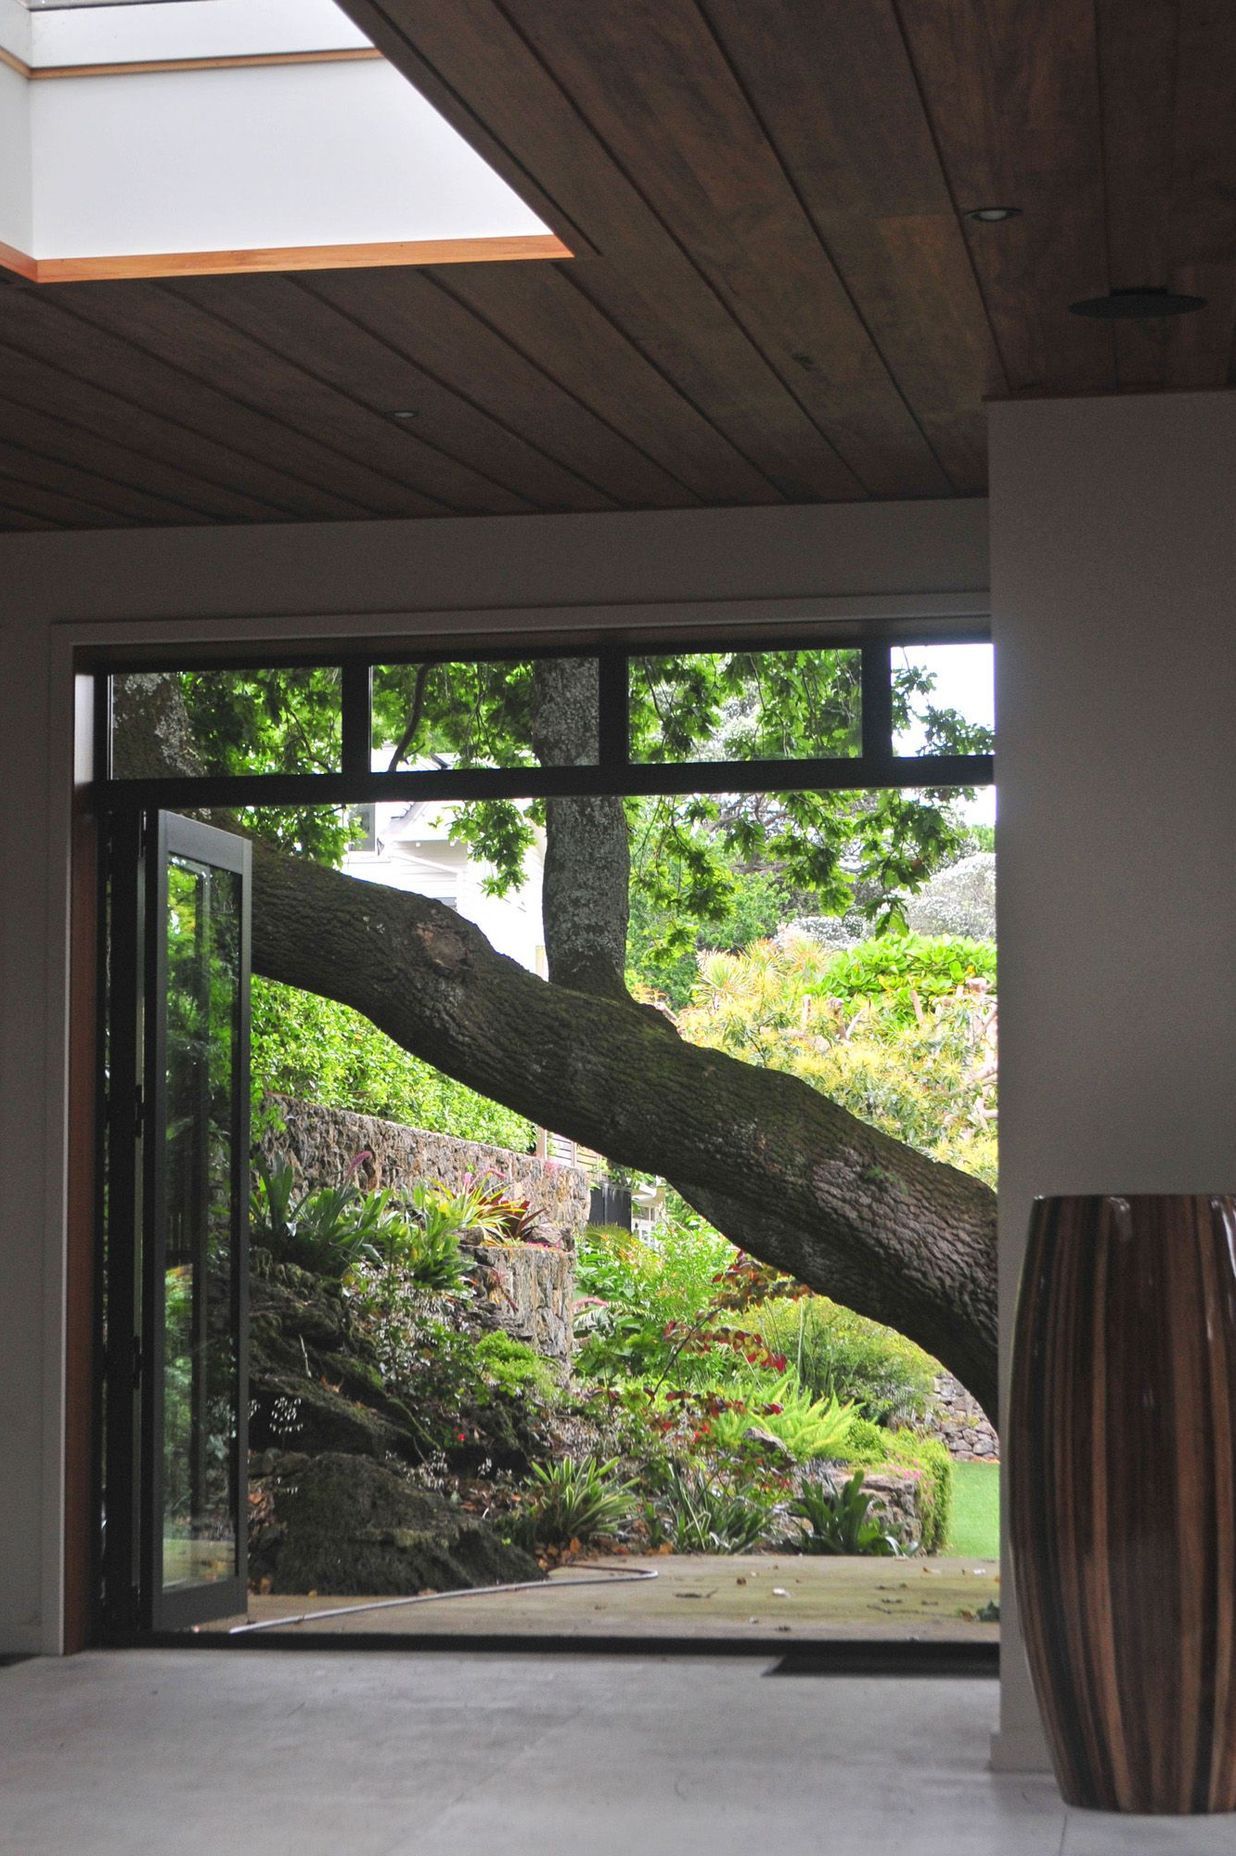 The existing oak was well intergarted to become a key feature linking house and garden